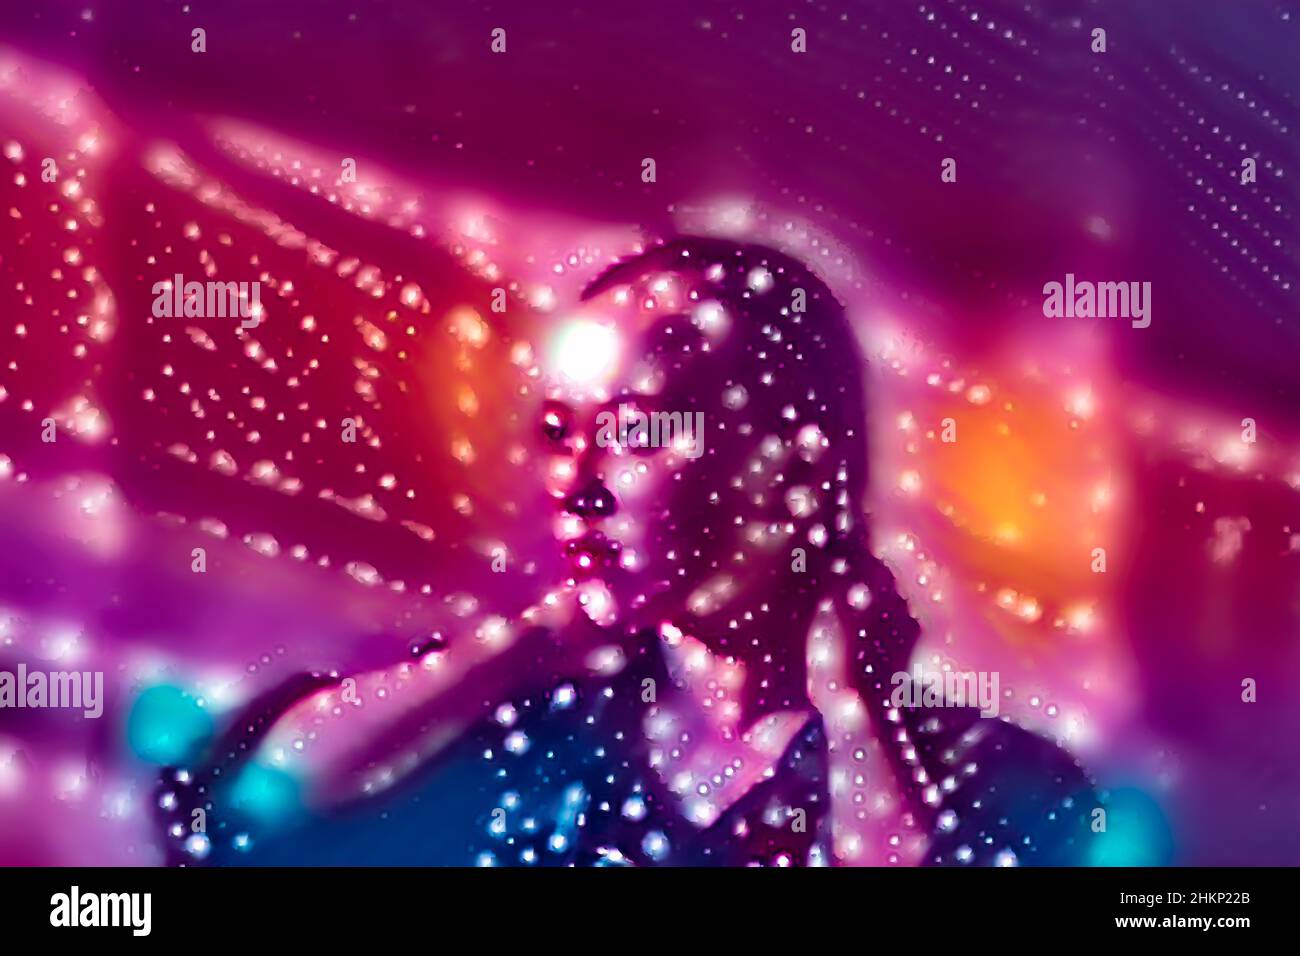 Abstract girl portrait in neon colors - computer generated illustration Stock Photo